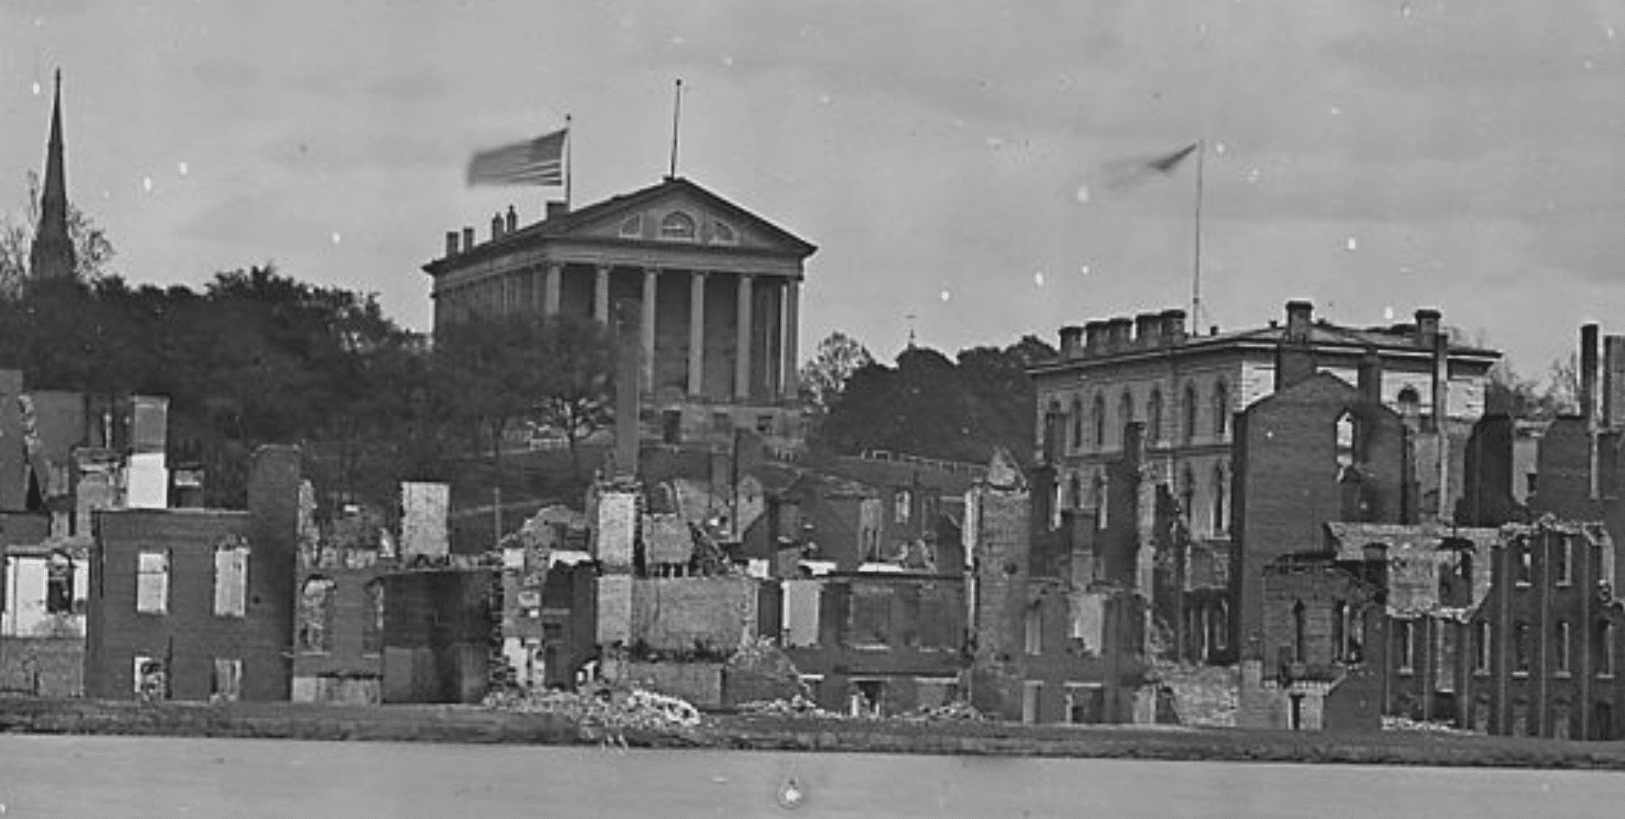 The Civil War Cover Story for the Great Reset: Richmond Ruins